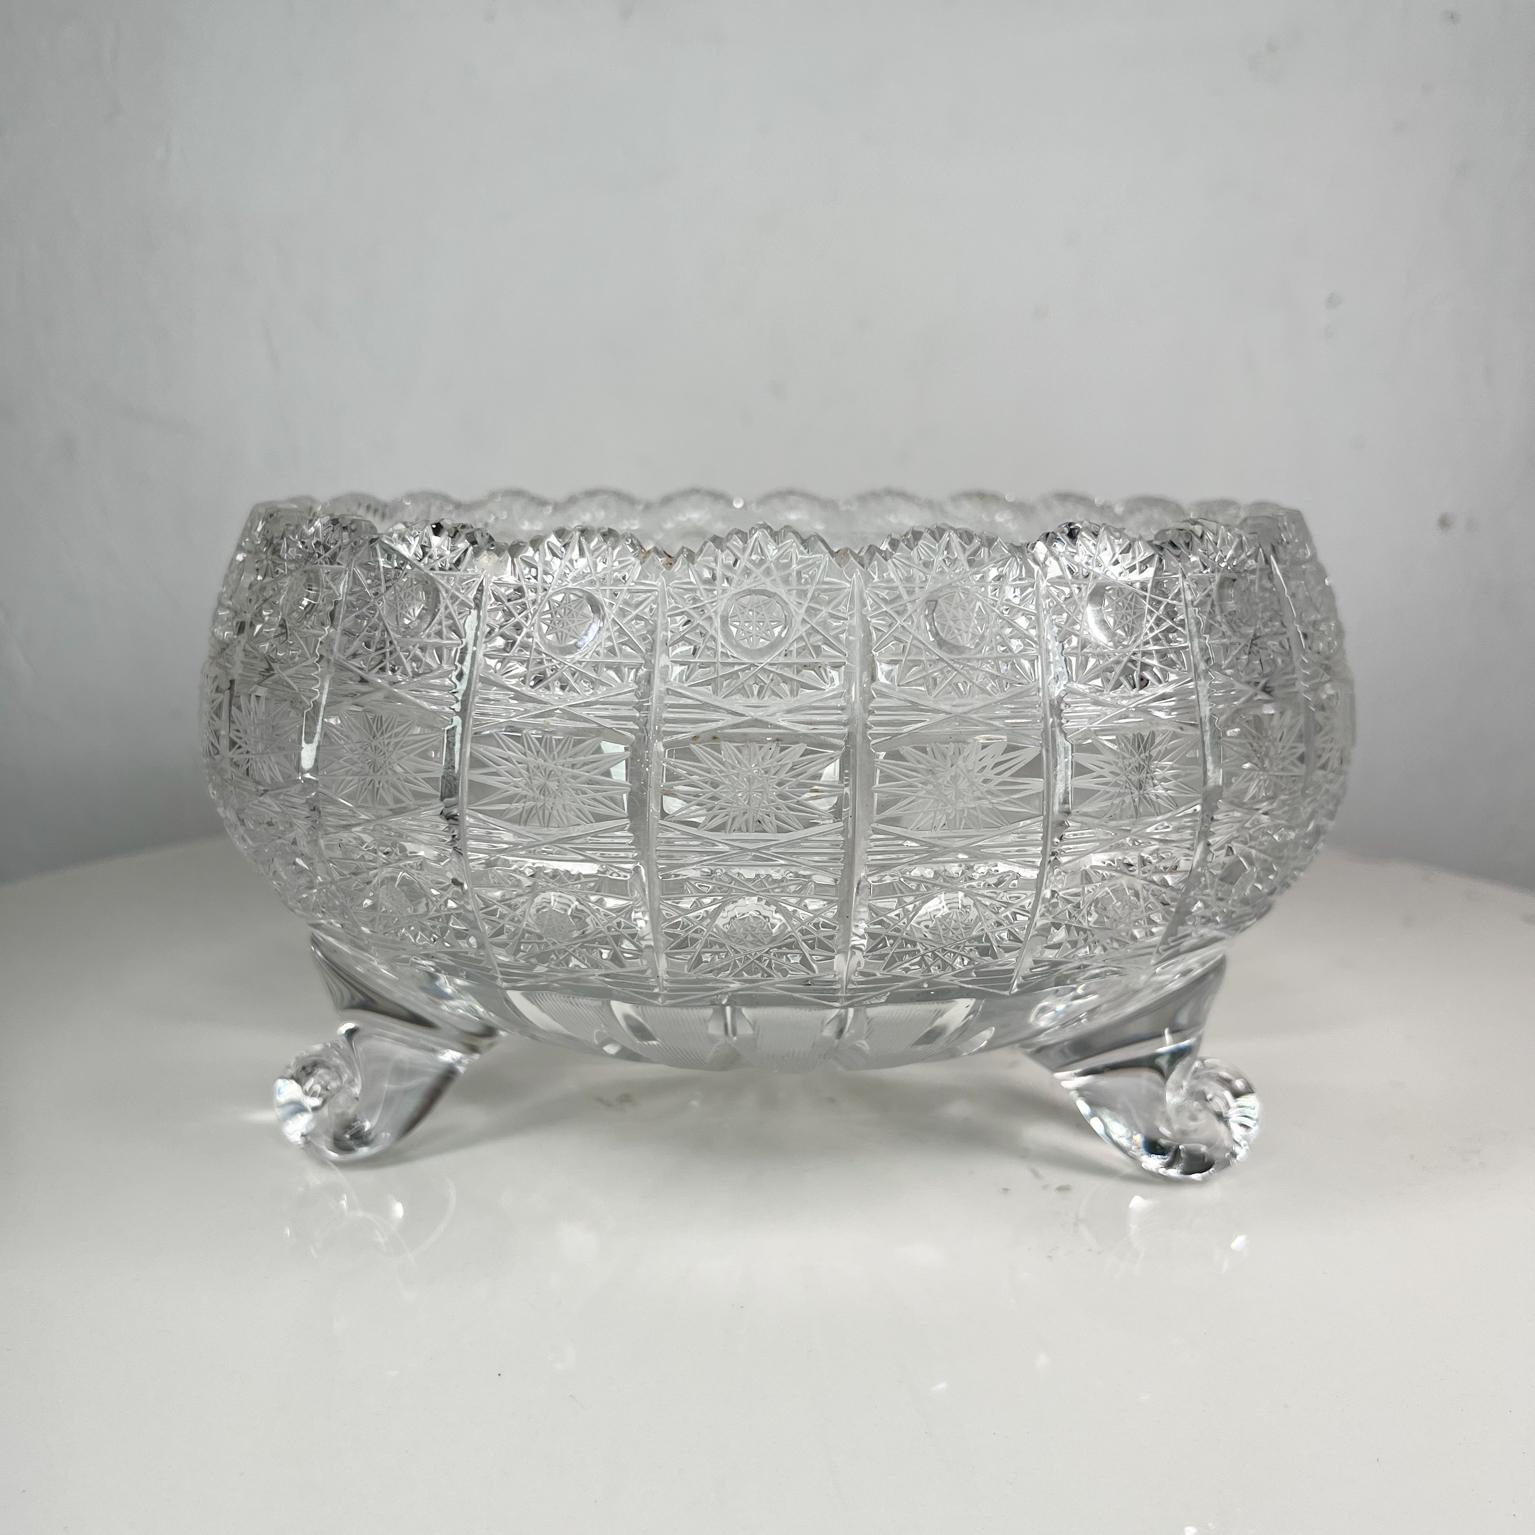 Vintage three-legged brilliant cut crystal bowl queen lace
Unmarked.
Measures: 9.75 x 5.5 tall
Preowned unrestored original vintage condition.
See images provided.
 